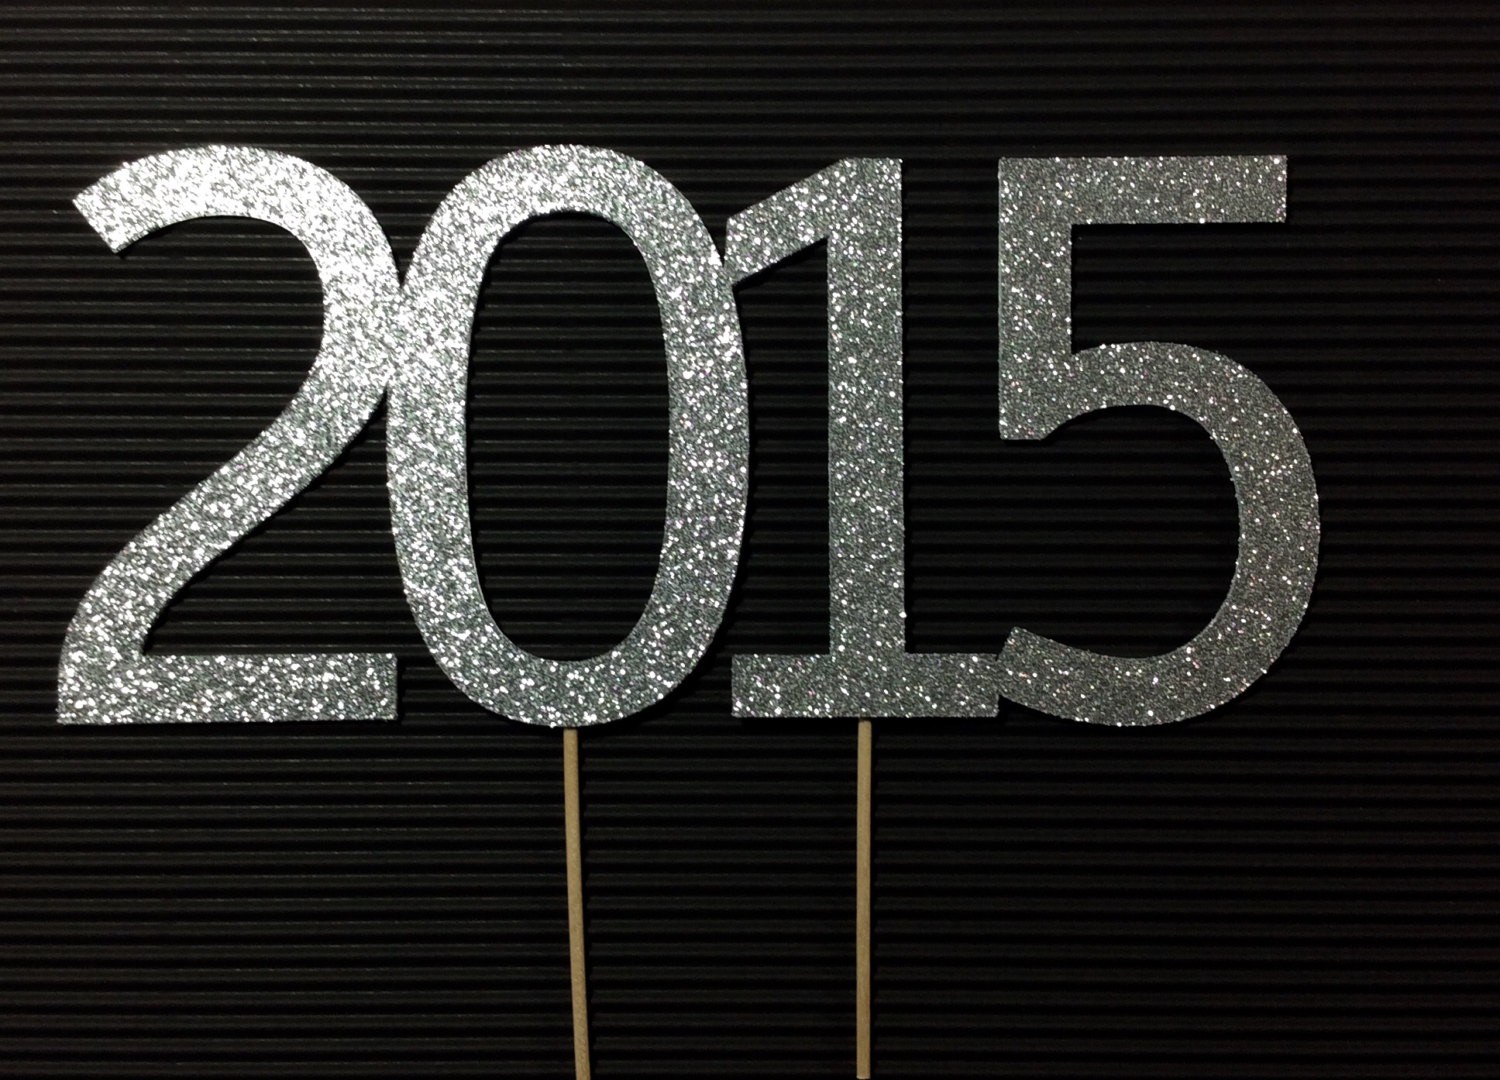 2015-silver-glitter-cake-topper-new-years-2015-new-year-ideas-paper-goods-cake-topper-f62902